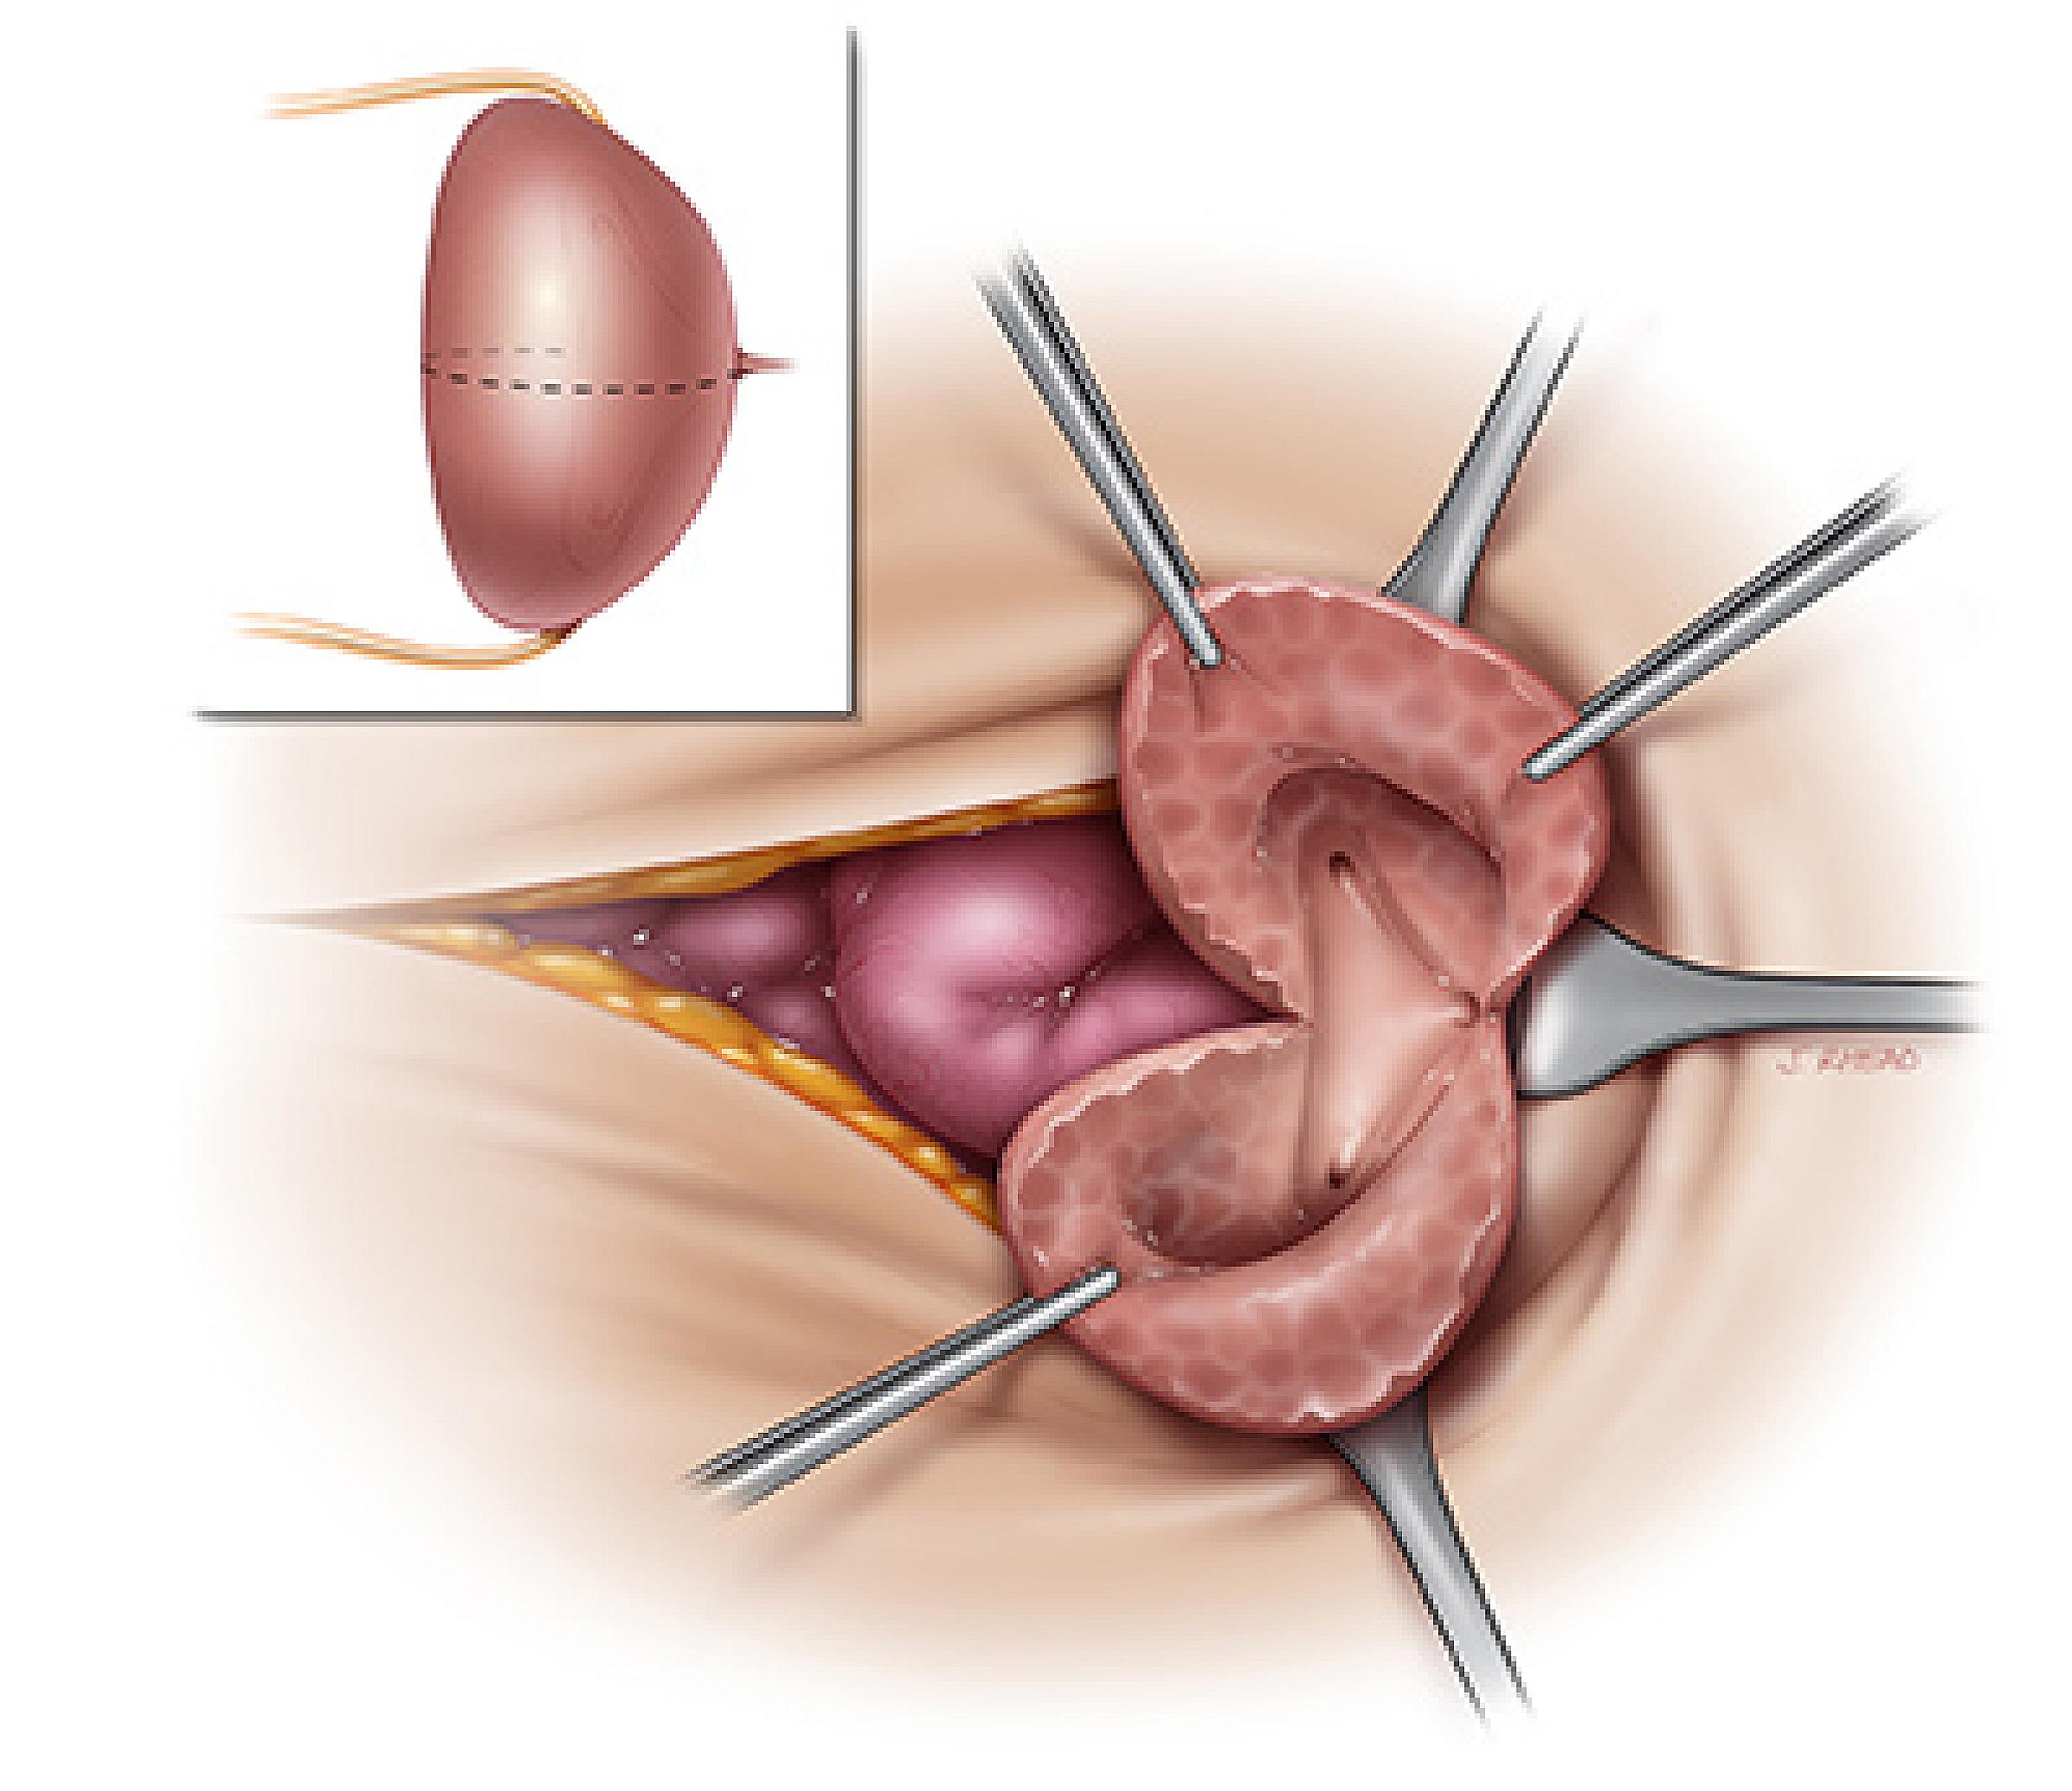 An illustration of the incision for the procedure